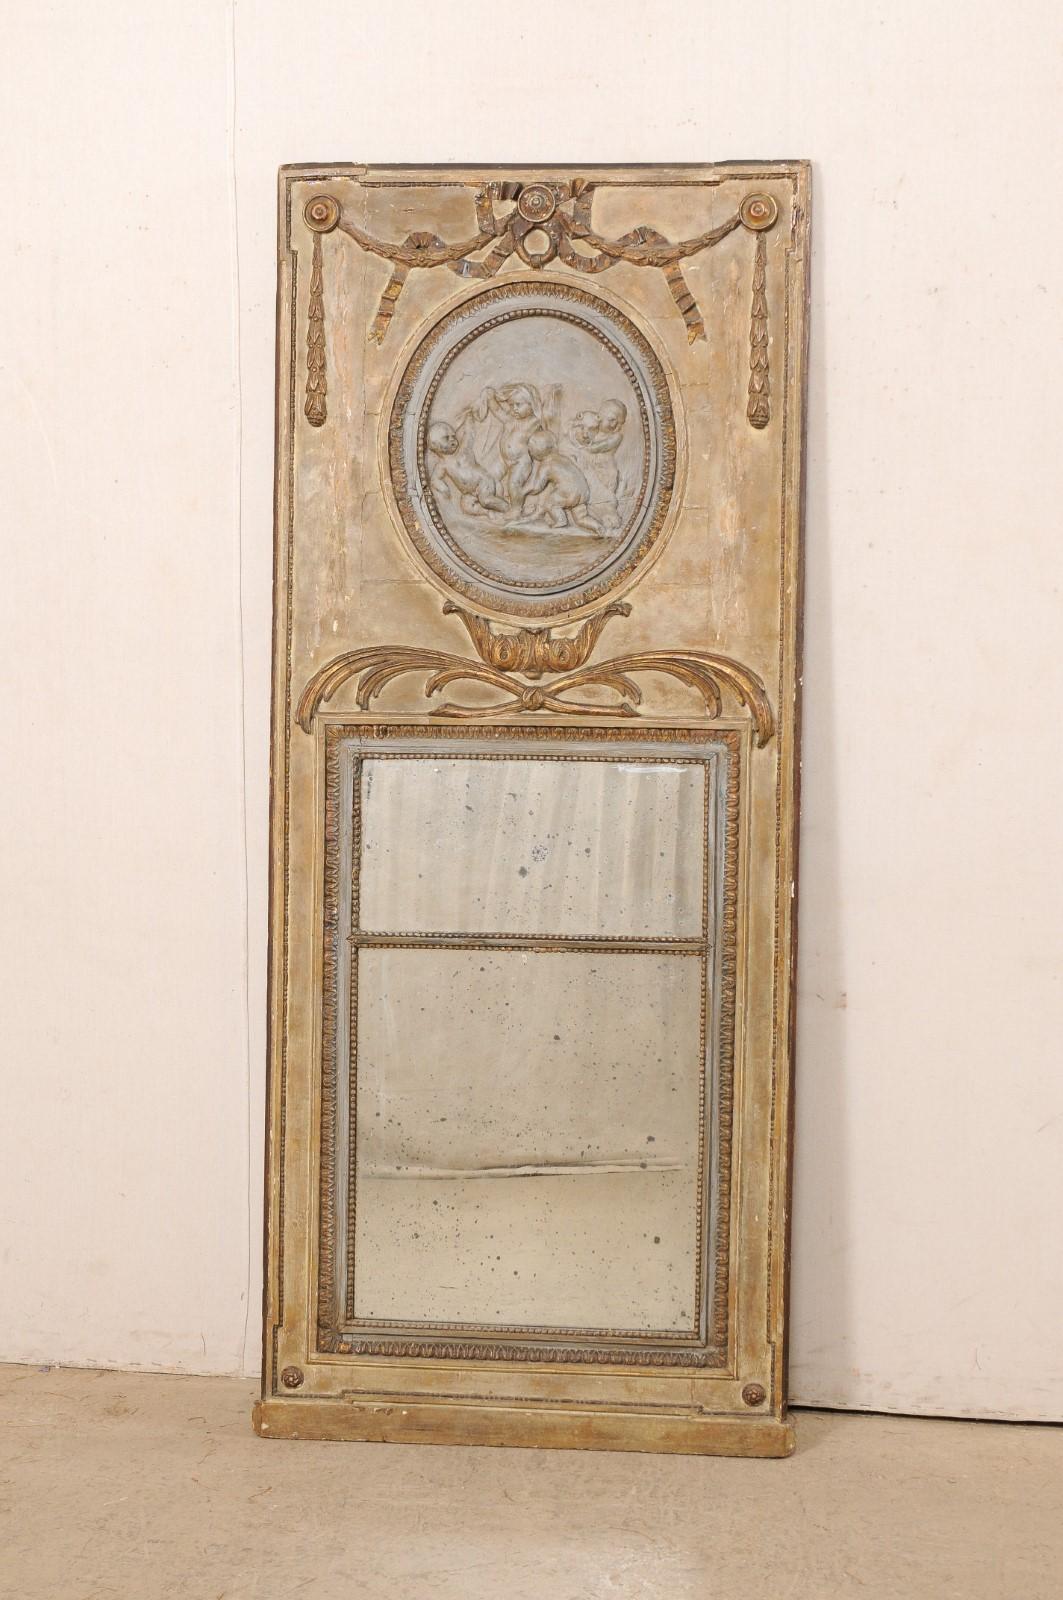 A French neoclassic carved and painted wood trumeau mirror from the 18th century. This antique mirror from France has the tall rectangular-shape, typical of trumeau design, with wooden top section adorn with neoclassical carved bow-ties and garland